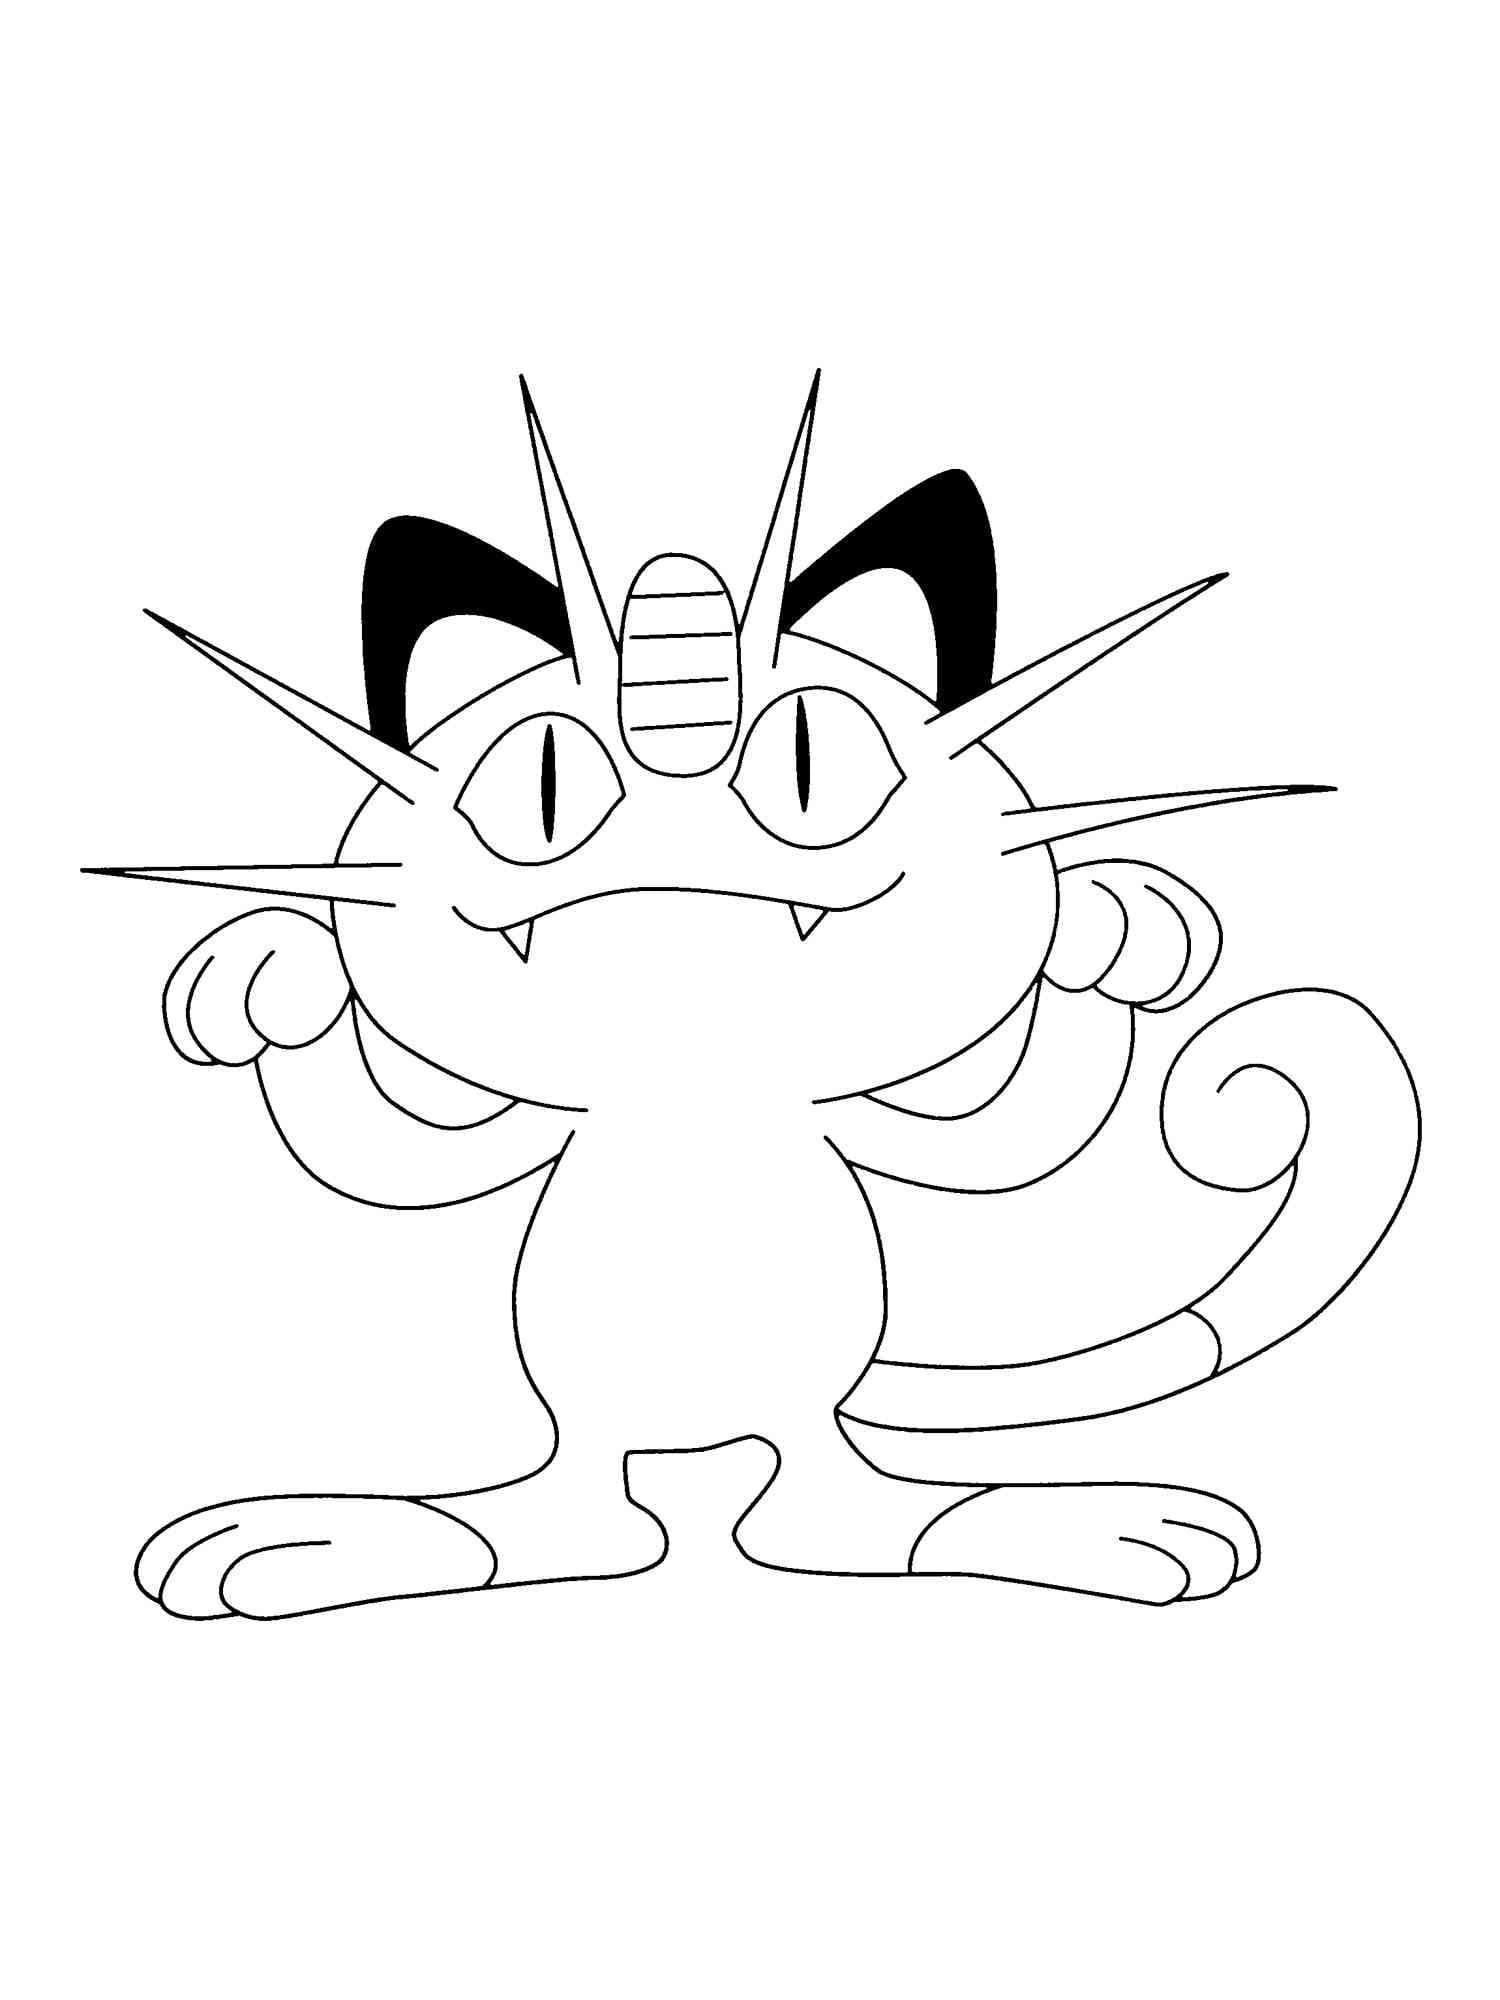 Pokemon Meowth Image coloring page - Download, Print or Color Online ...